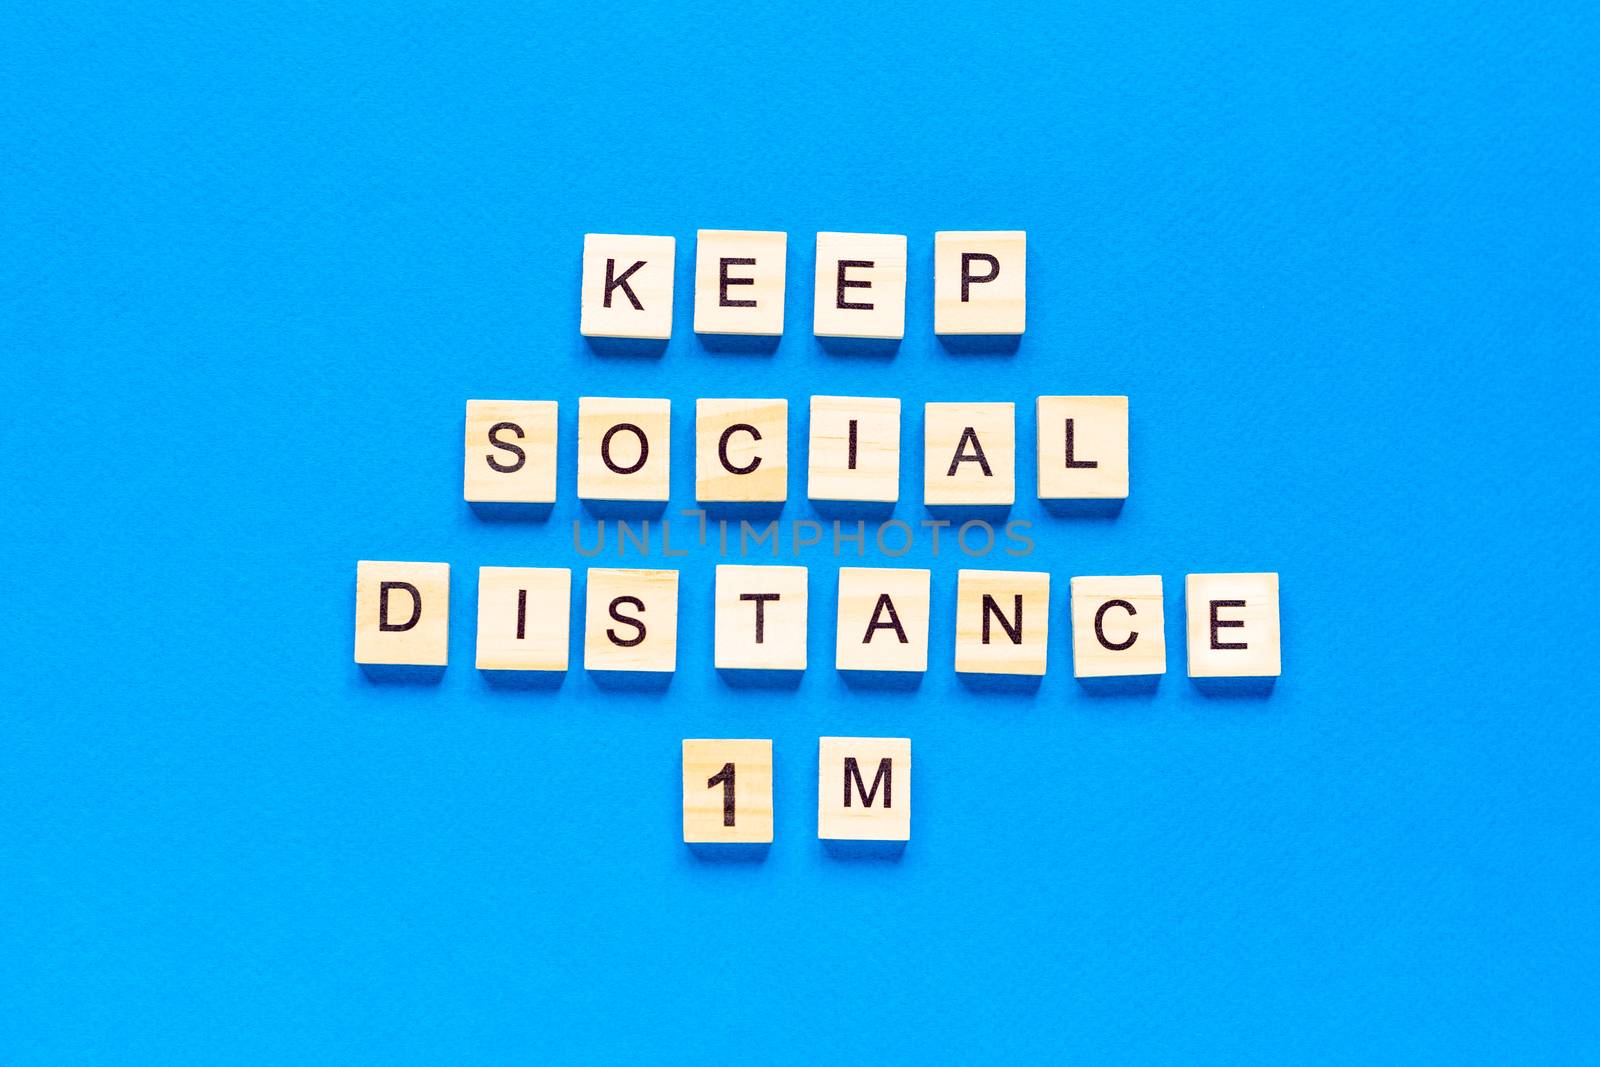 Words keep social distance 1 m. Wooden inscription on a blue background. Information sign of keep social distance 1 m from blocks. top view, by Pirlik